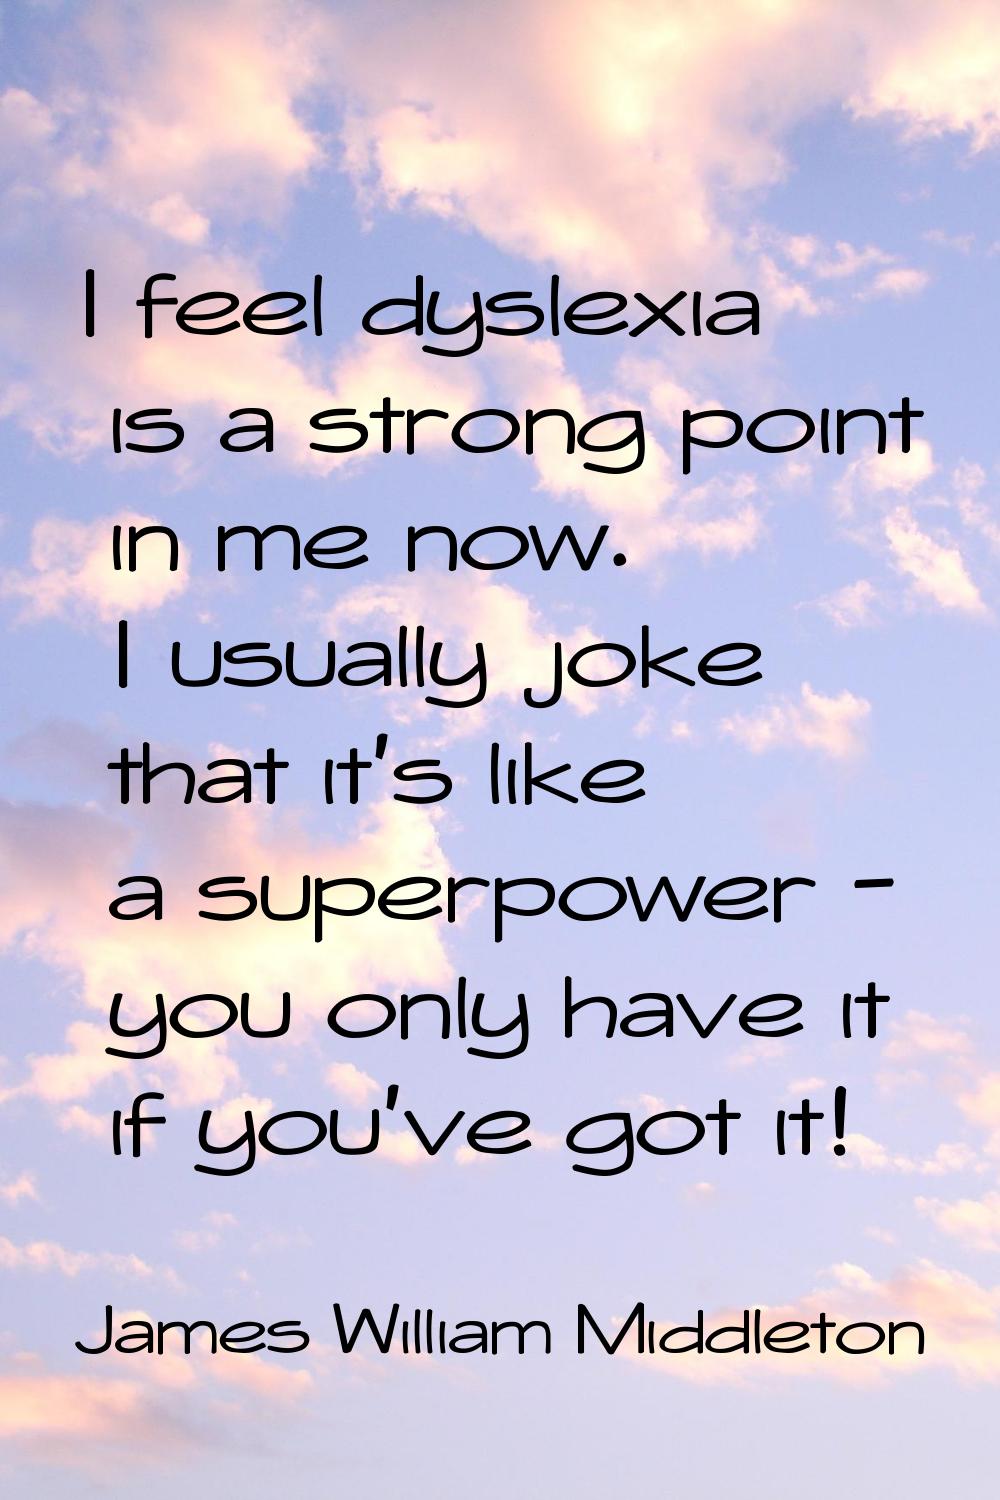 I feel dyslexia is a strong point in me now. I usually joke that it's like a superpower - you only 